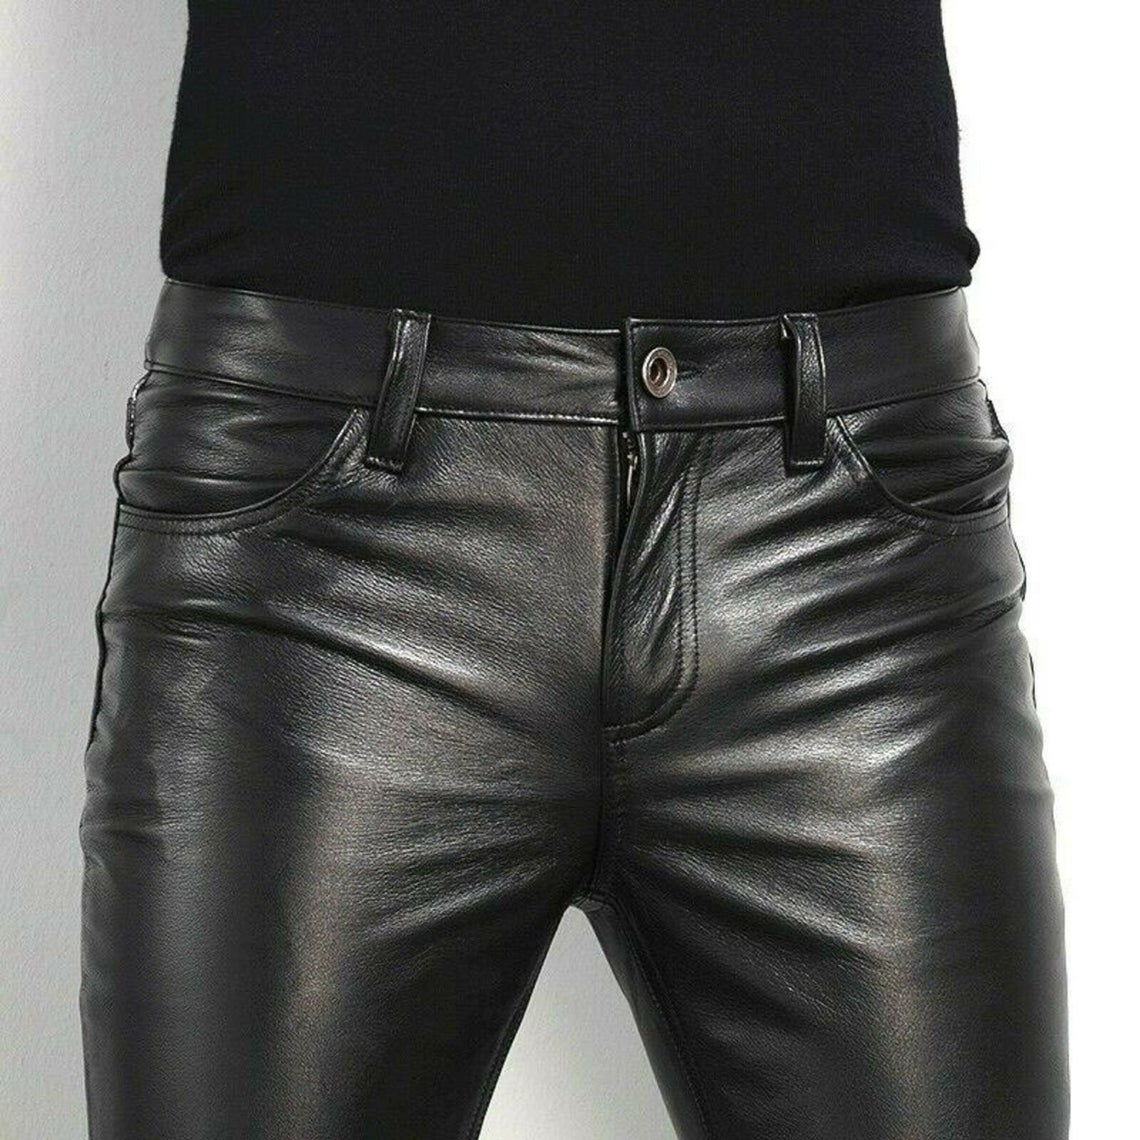 REAL BLACK LEATHER PANTS JEANS TROUSERS